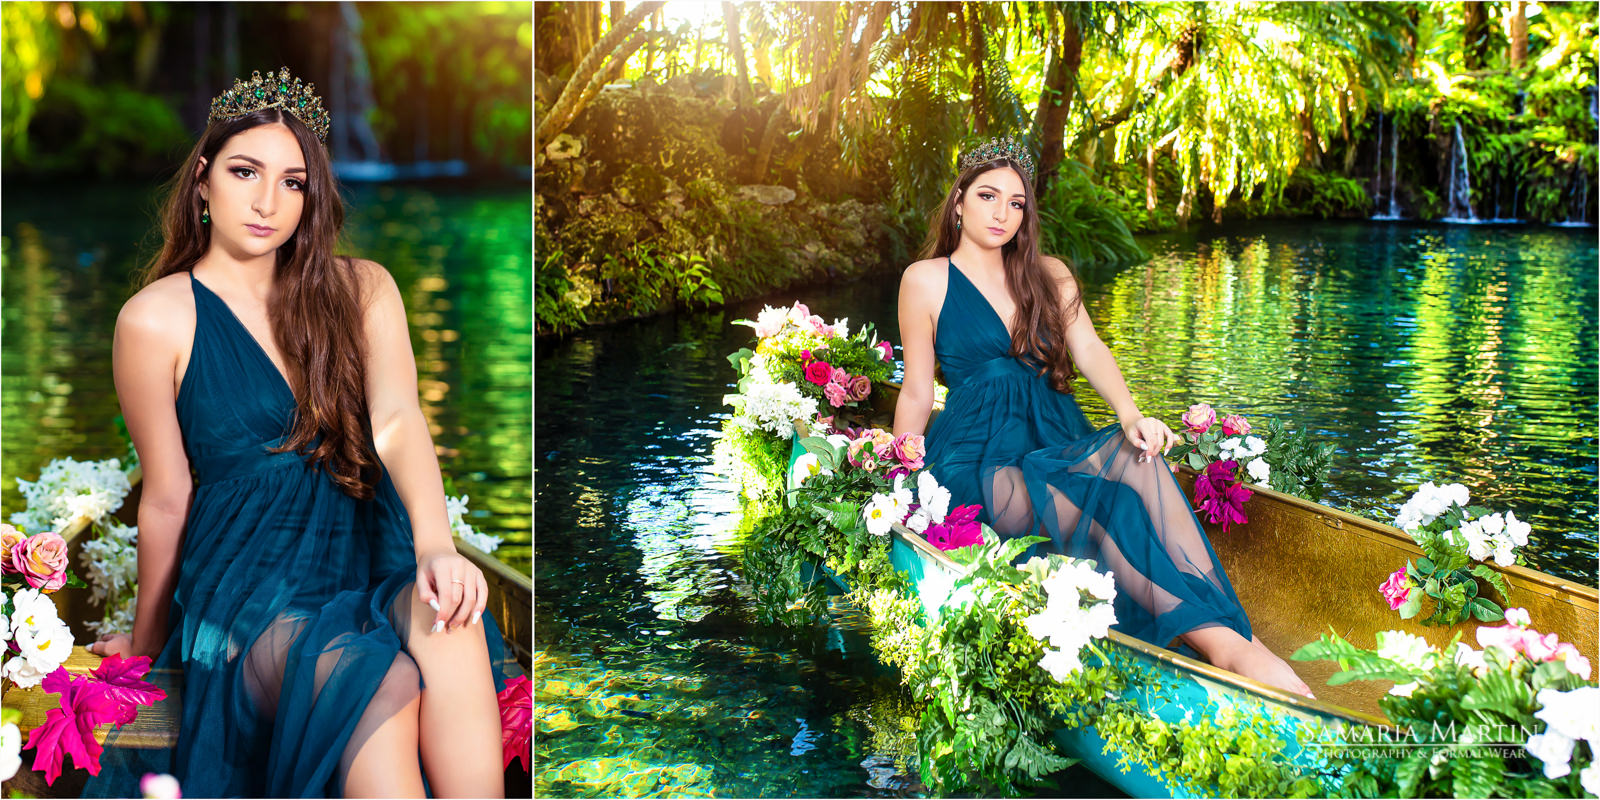 Quinceanera in Secret Garden, quinceanera with flowers, quinceanera photoshoot in a lake, sweet 15, Marys Bridal dresses